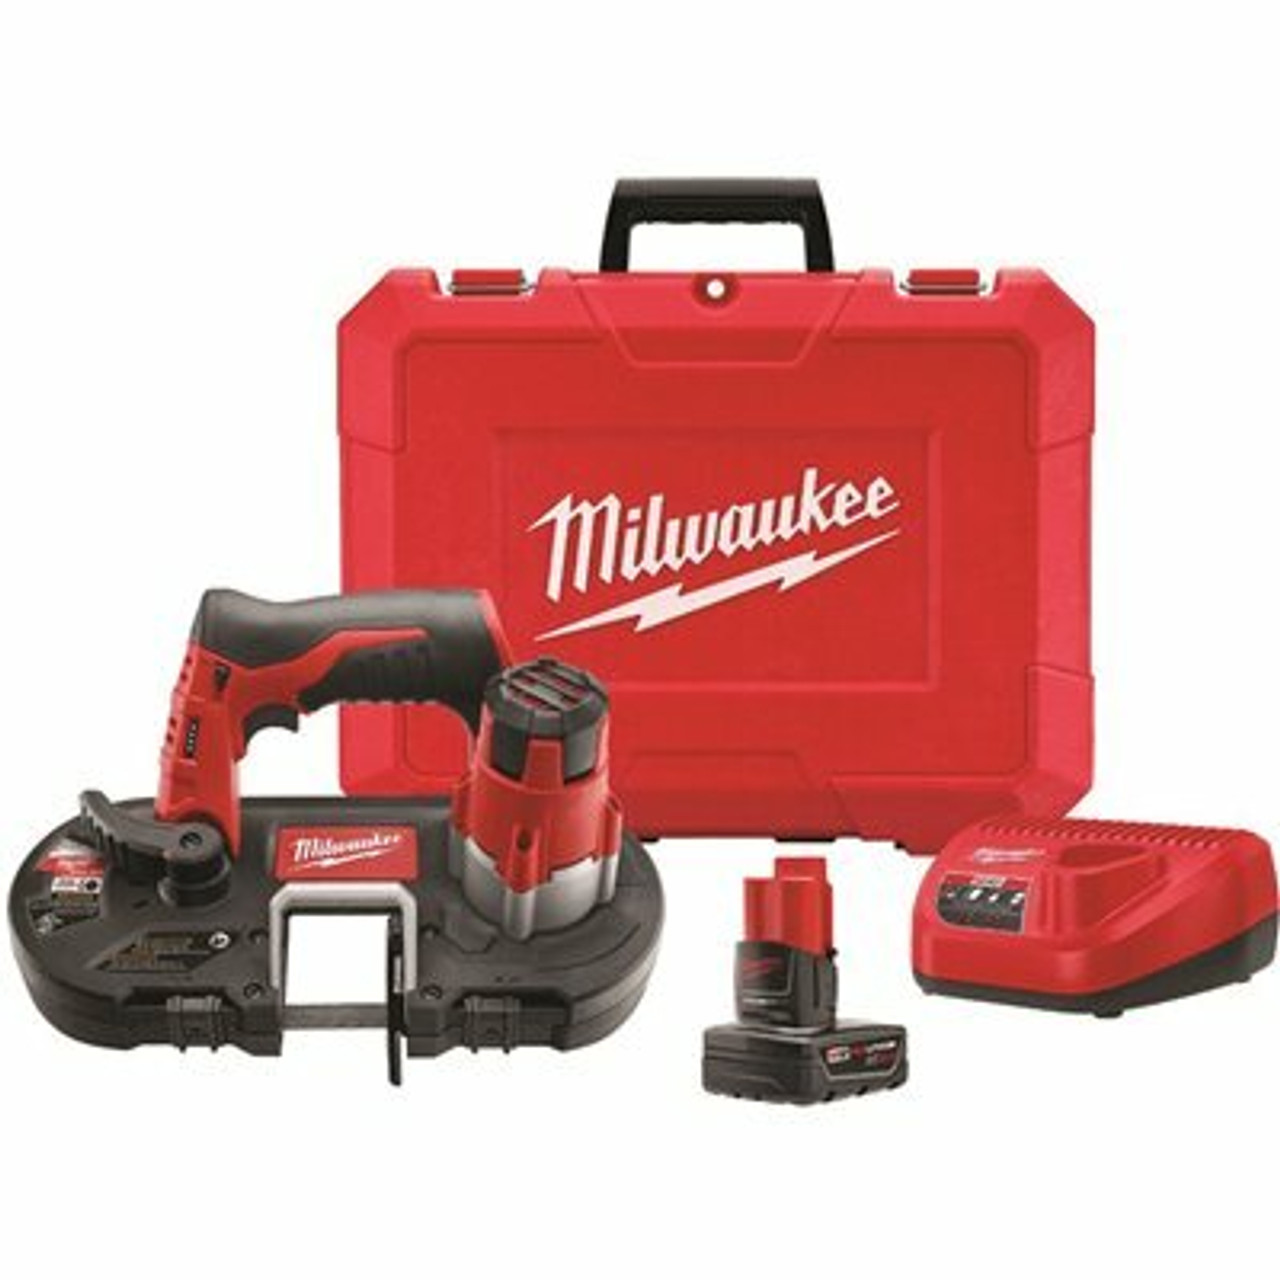 Milwaukee M12 12-Volt Lithium-Ion Cordless Sub-Compact Band Saw Xc Kit With One 3.0H Battery, Charger And Hard Case